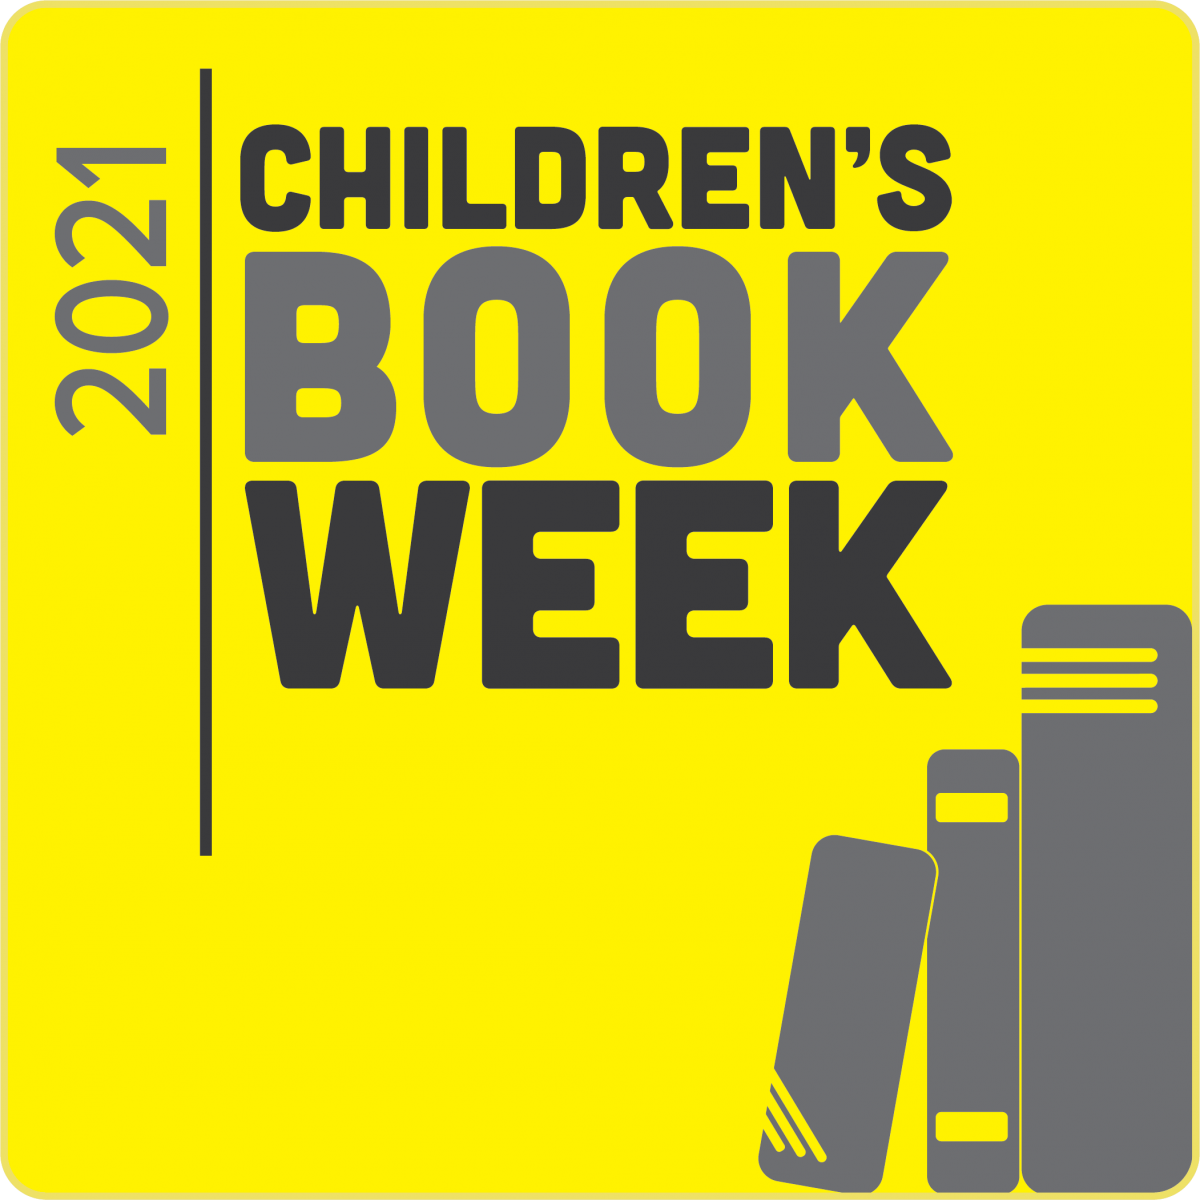 ANNOUNCING PLANS FOR 2021 CHILDREN’S BOOK WEEK